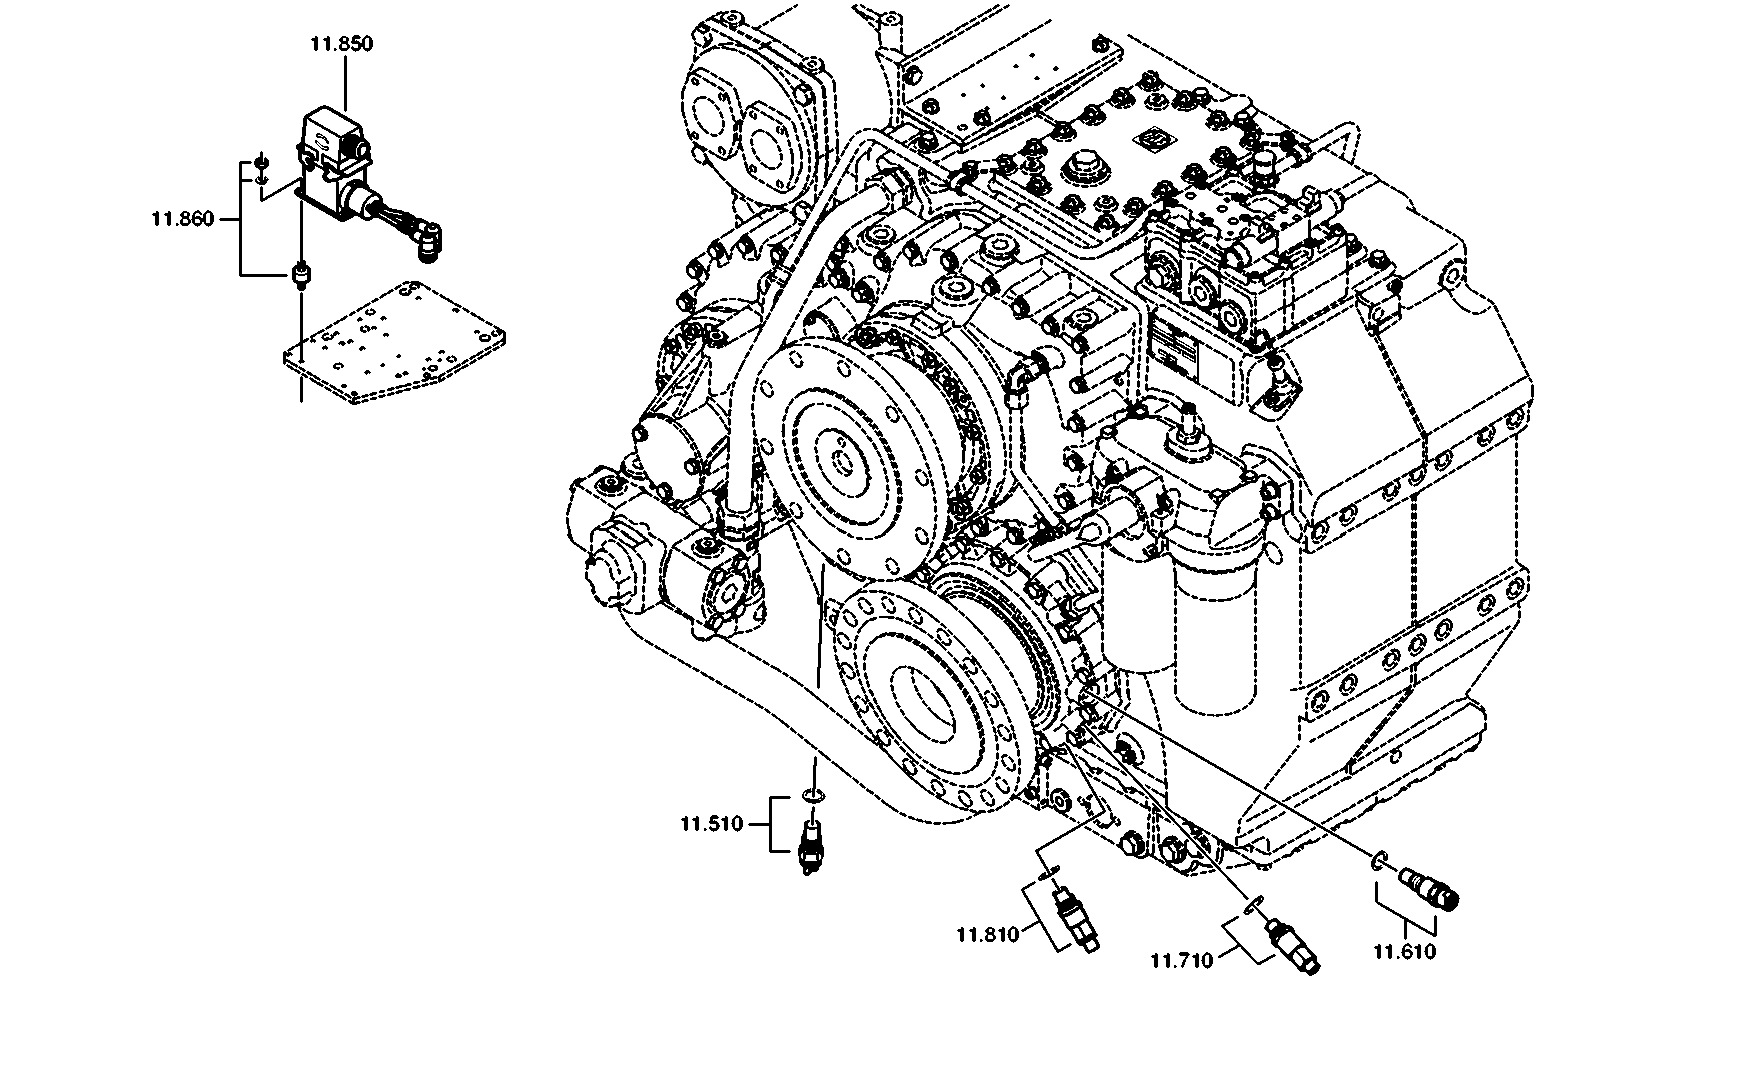 drawing for LANG GMBH 570269708 - INDUCTIVE TRANSMITTER (figure 3)